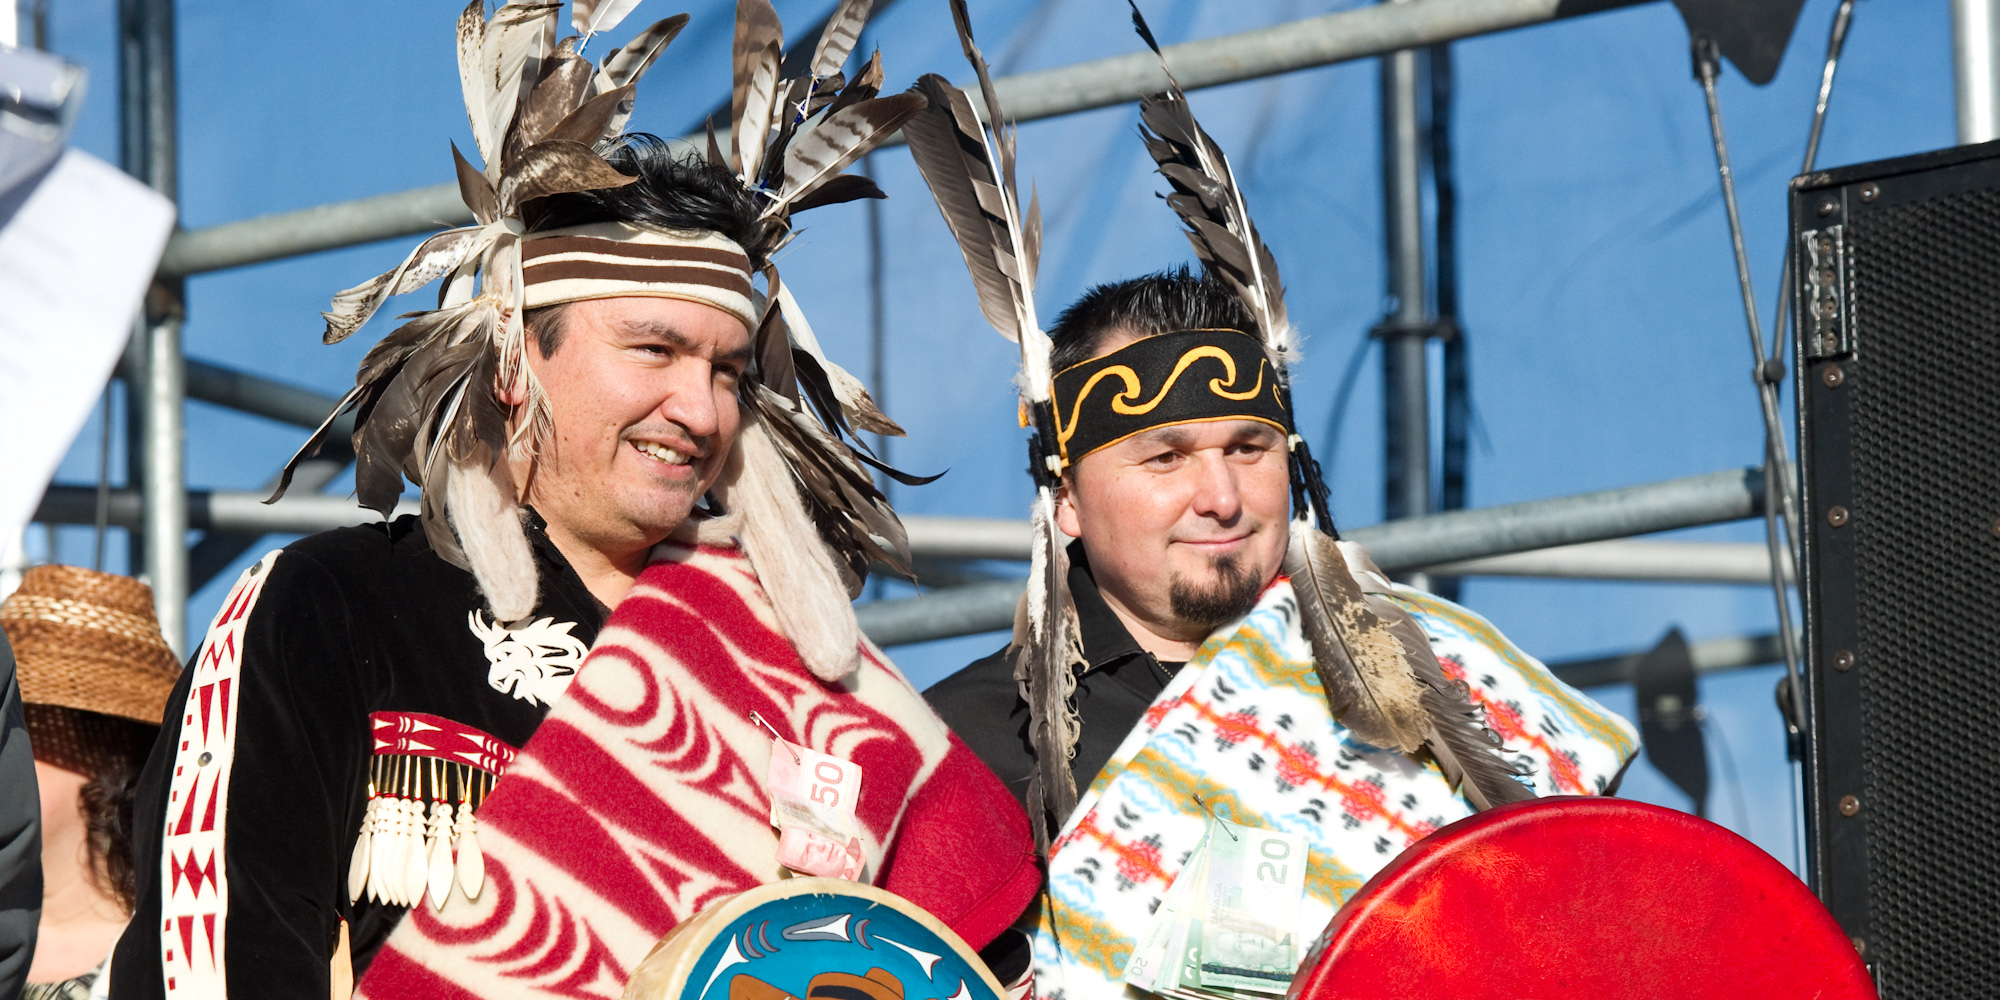 7 Common Elements in Successful Indigenous Relations Strategies